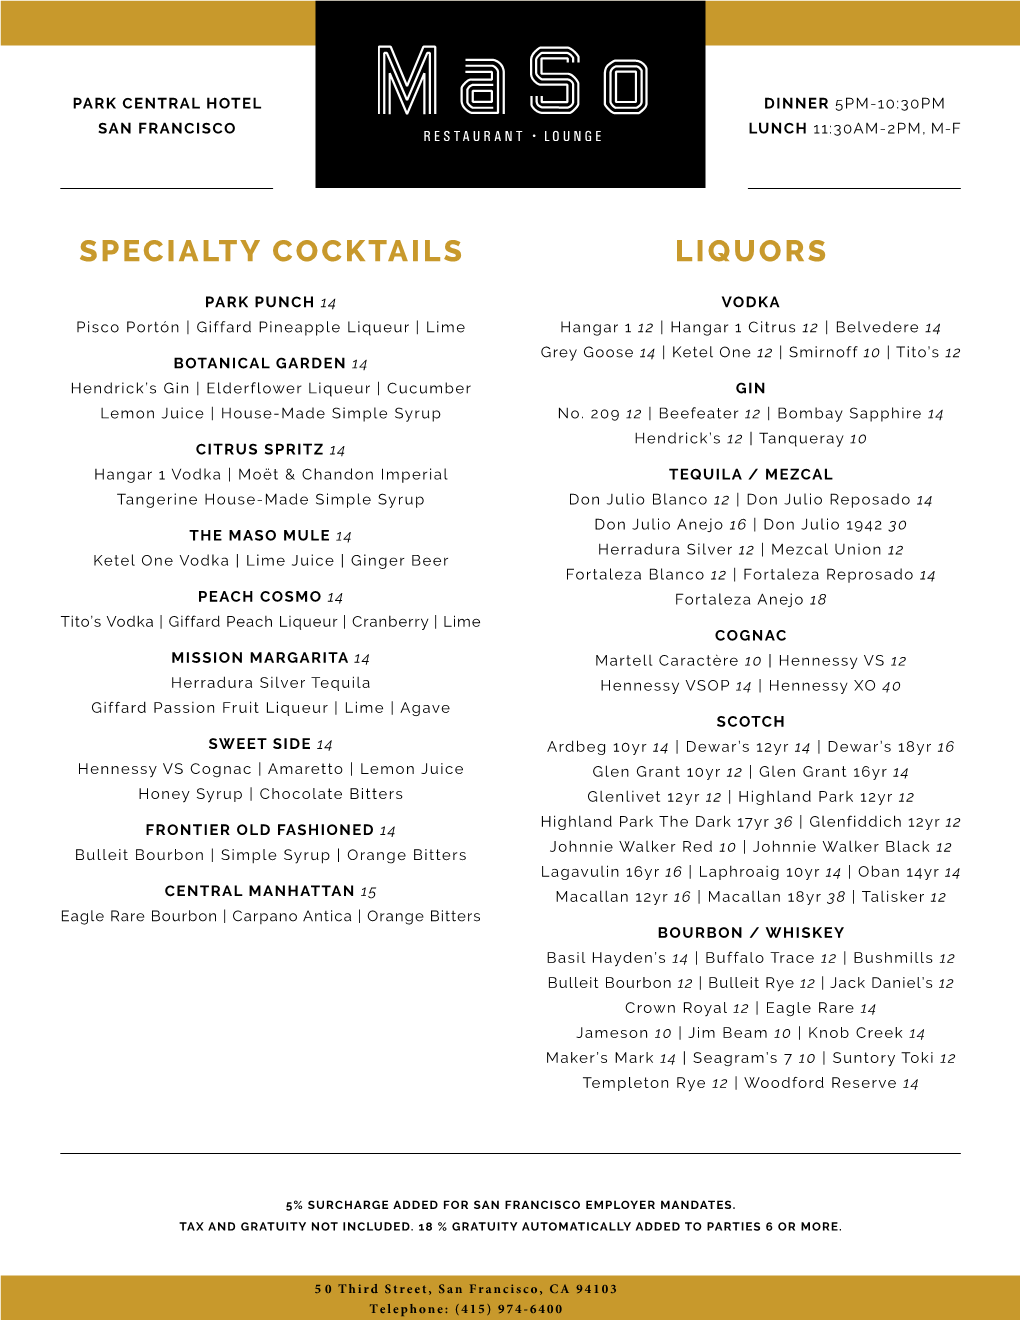 Specialty Cocktails Liquors